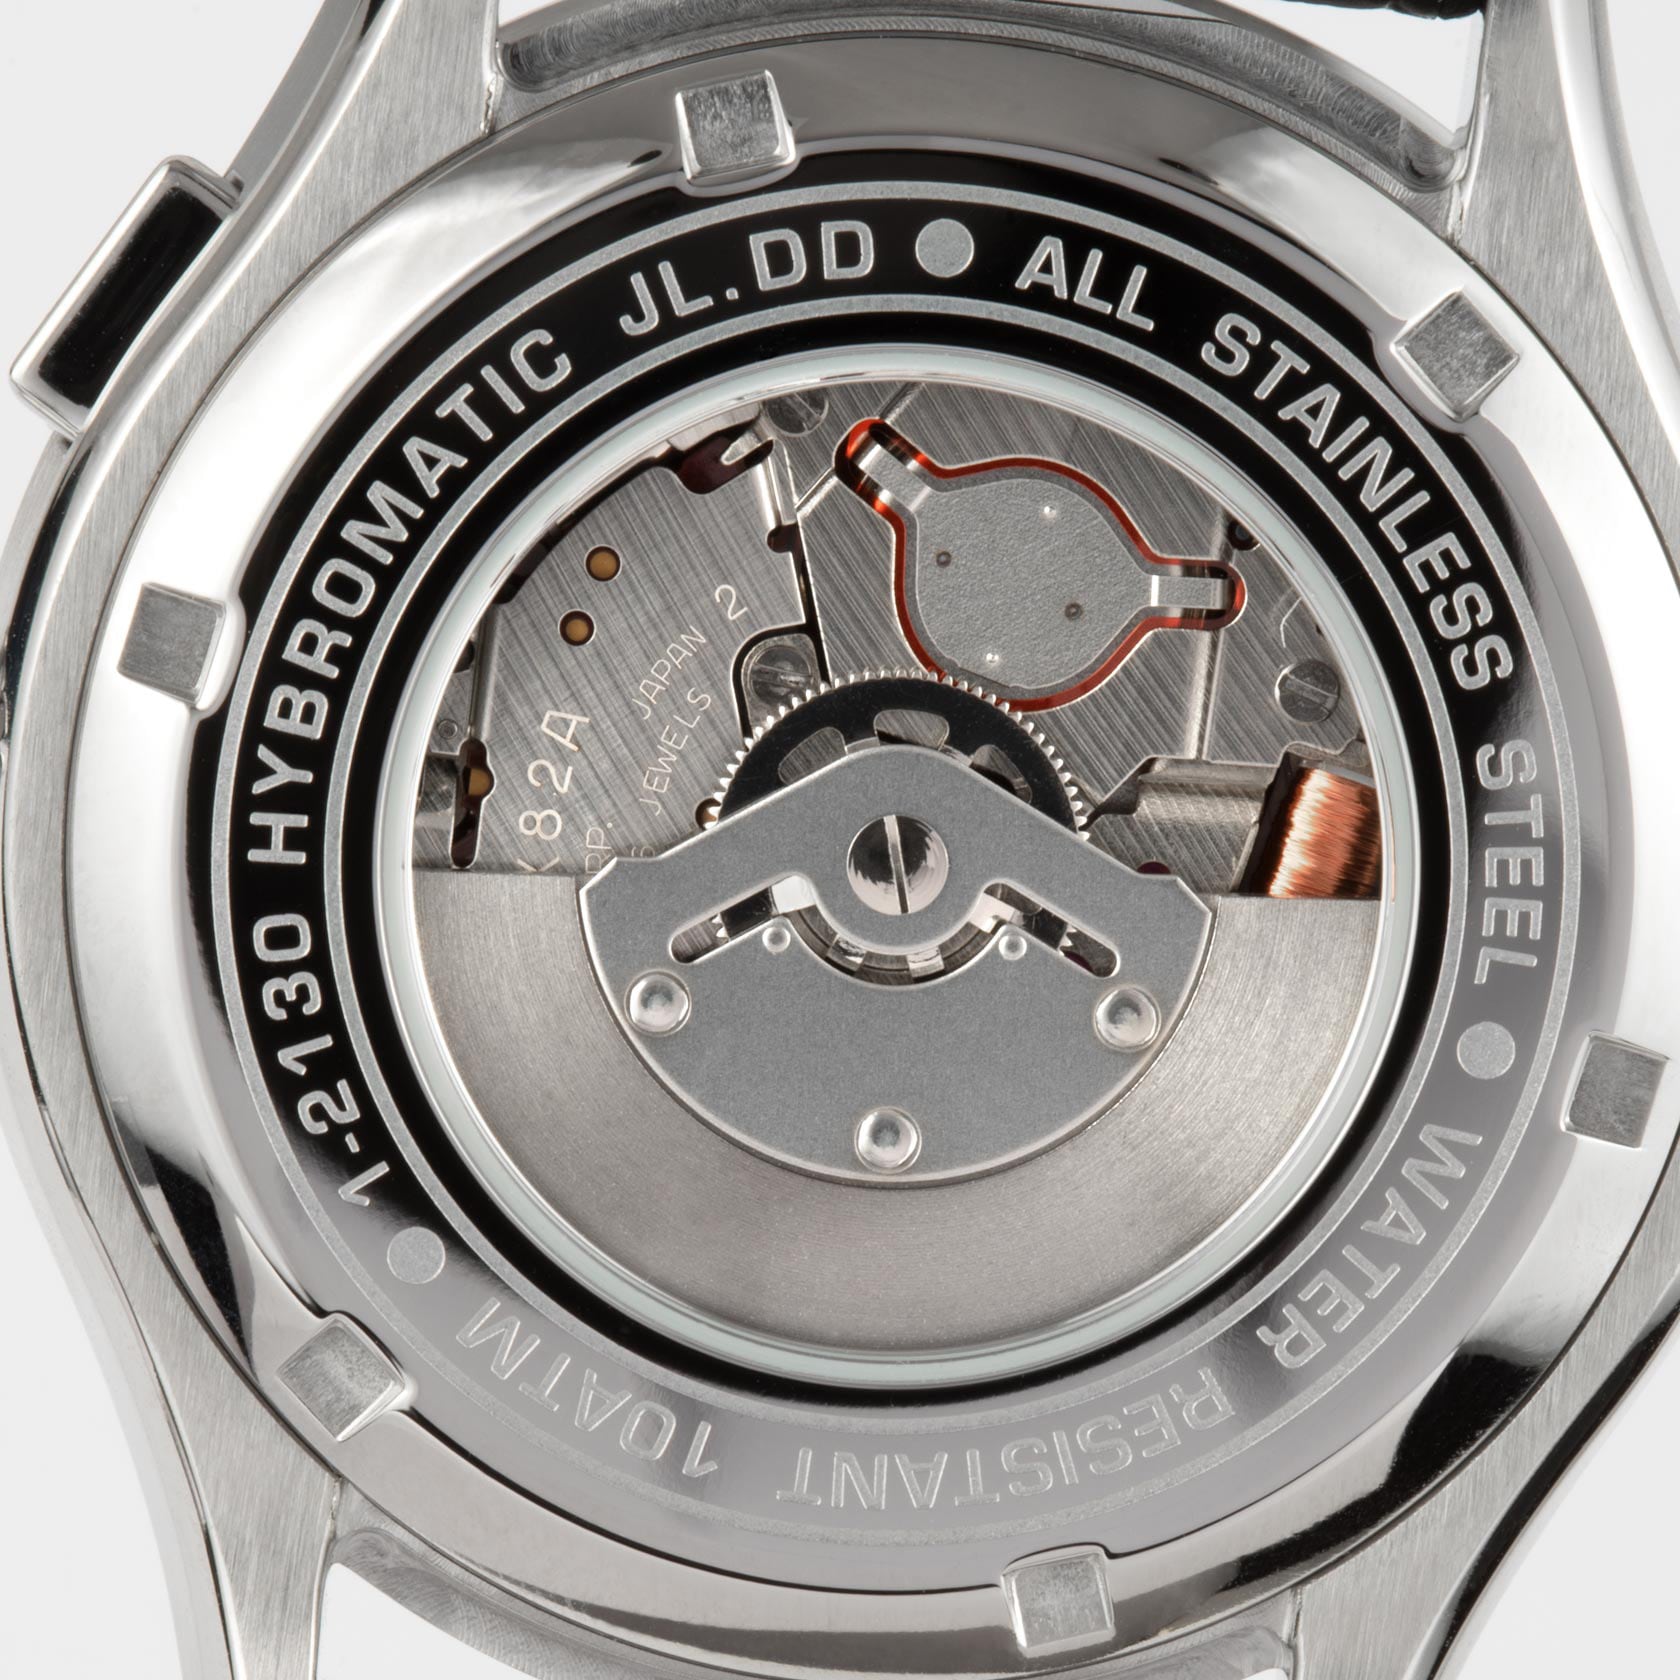 Jacques Lemans Kineticuhr »Hybromatic, 1-2130B« online kaufen bei OTTO